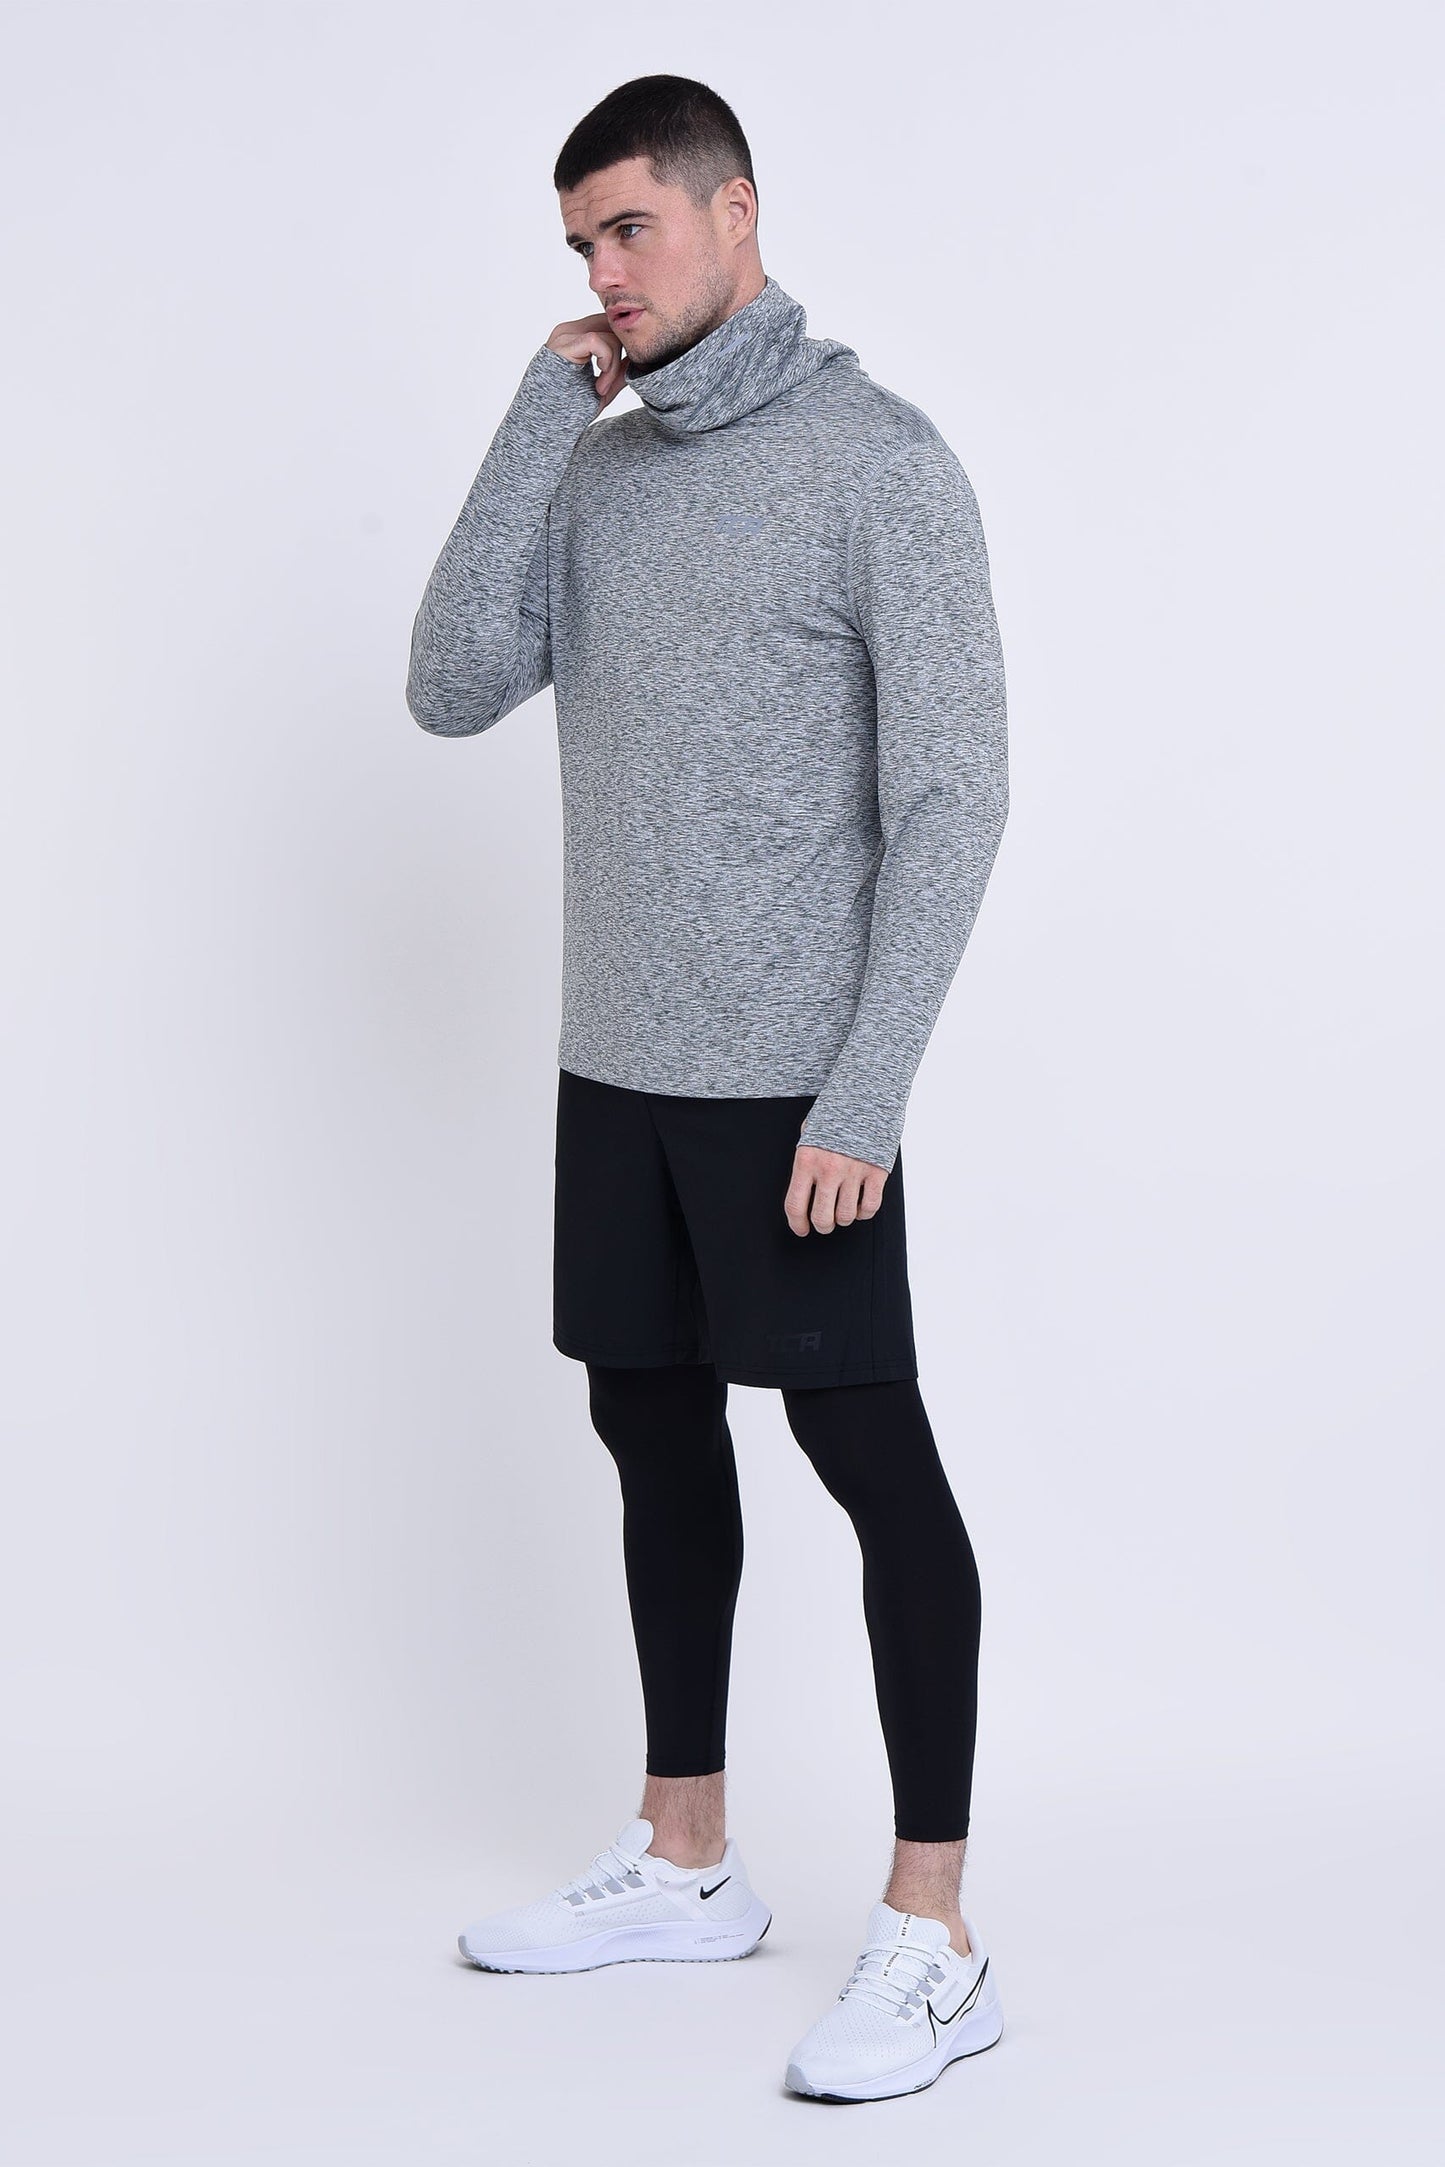 Warm-Up Thermal Long Sleeve Funnel Neck Top For Men With Brushed Inner Fabric, Thumbholes & Reflective Strips